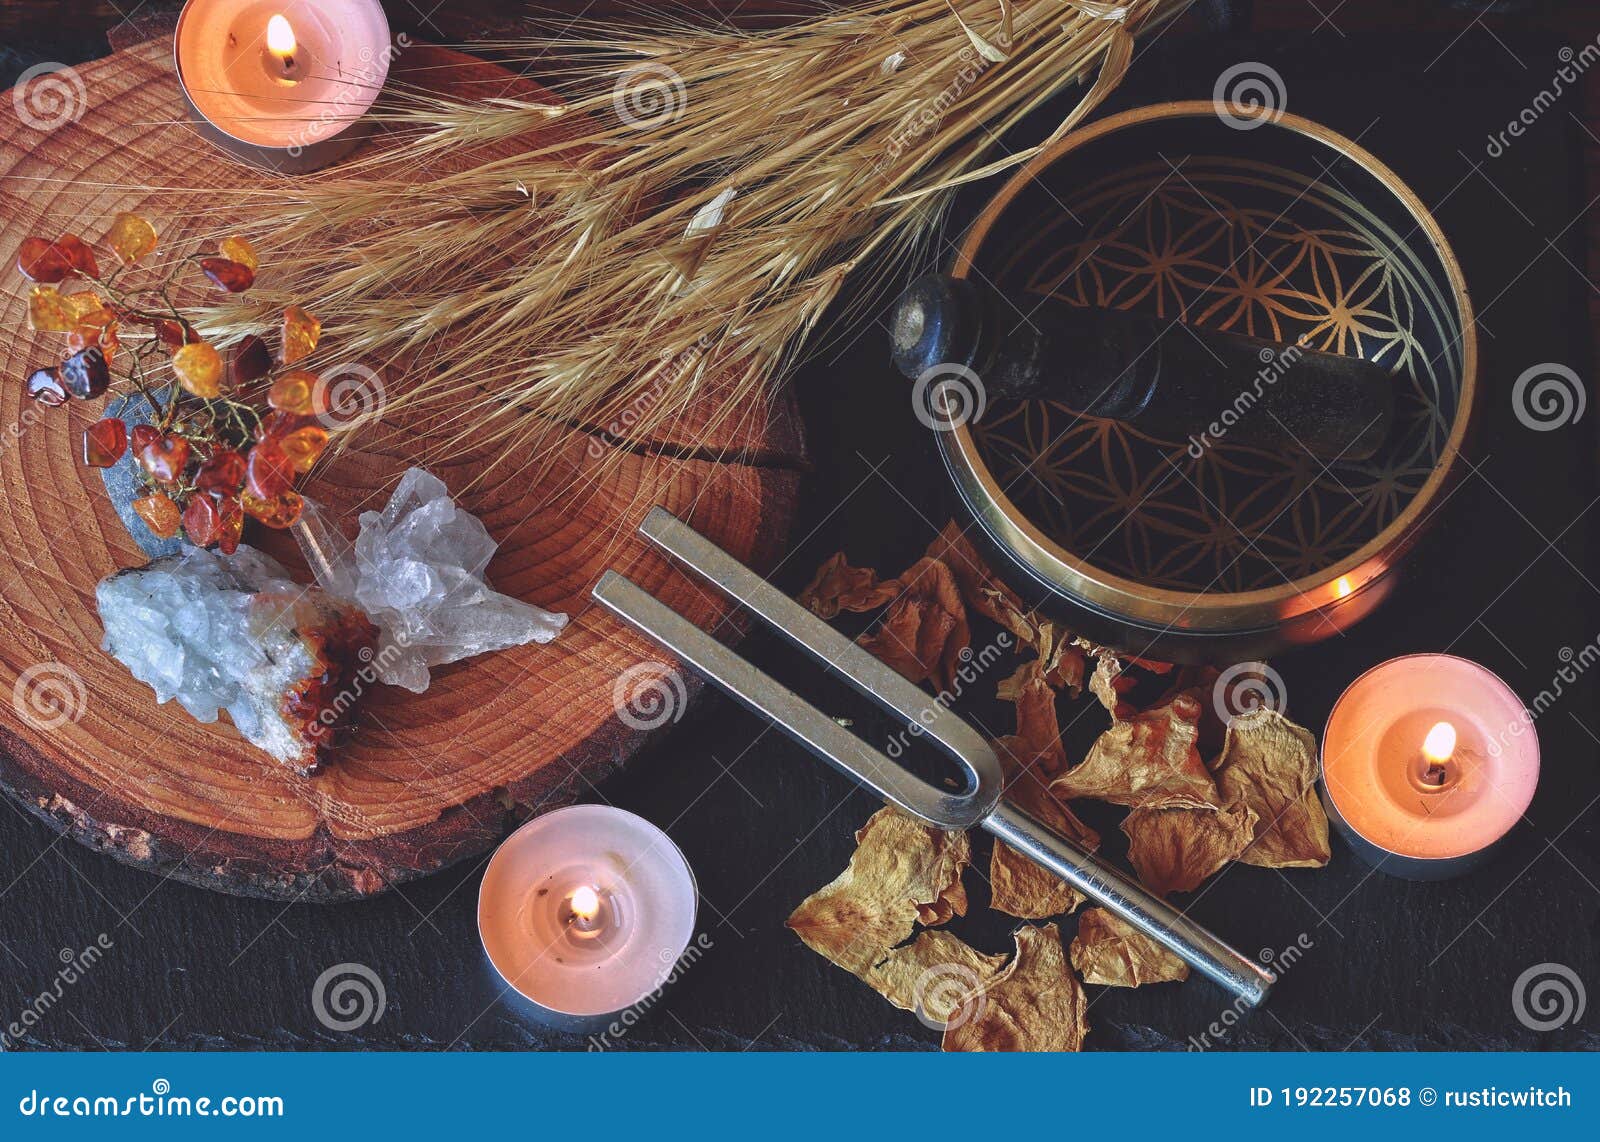 wiccan witch altar prepared for sound healing magick with 741hz tuning fork and tibetan singing bowl